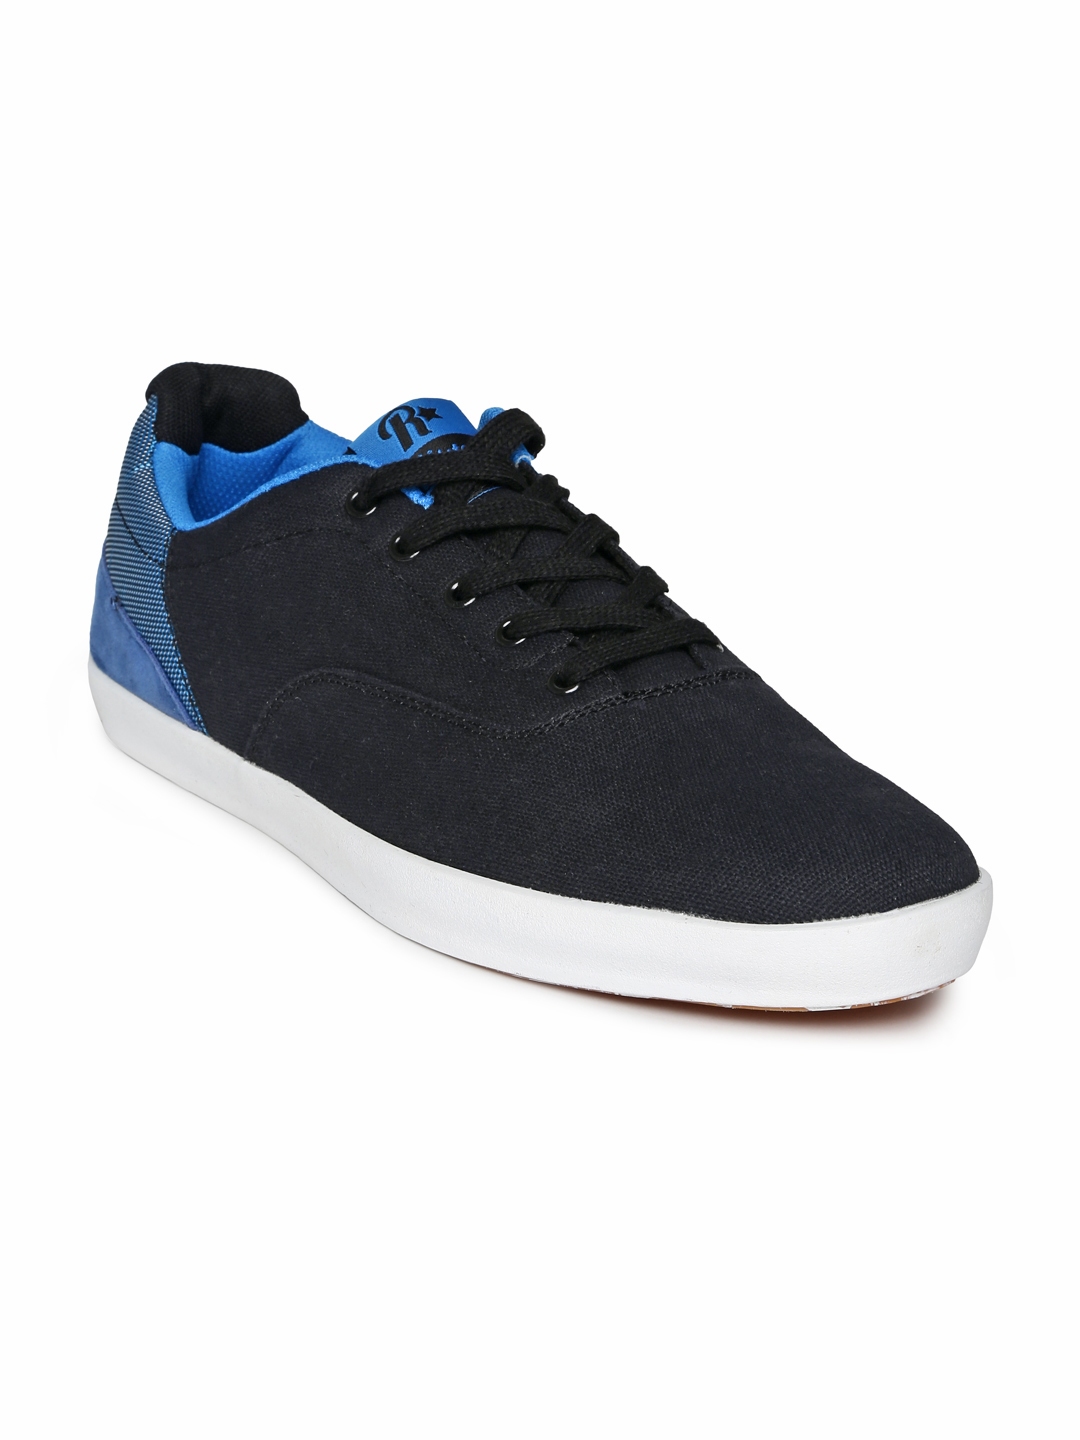 Buy Roadster Men Black Casual Shoes - Casual Shoes for Men 582064 | Myntra